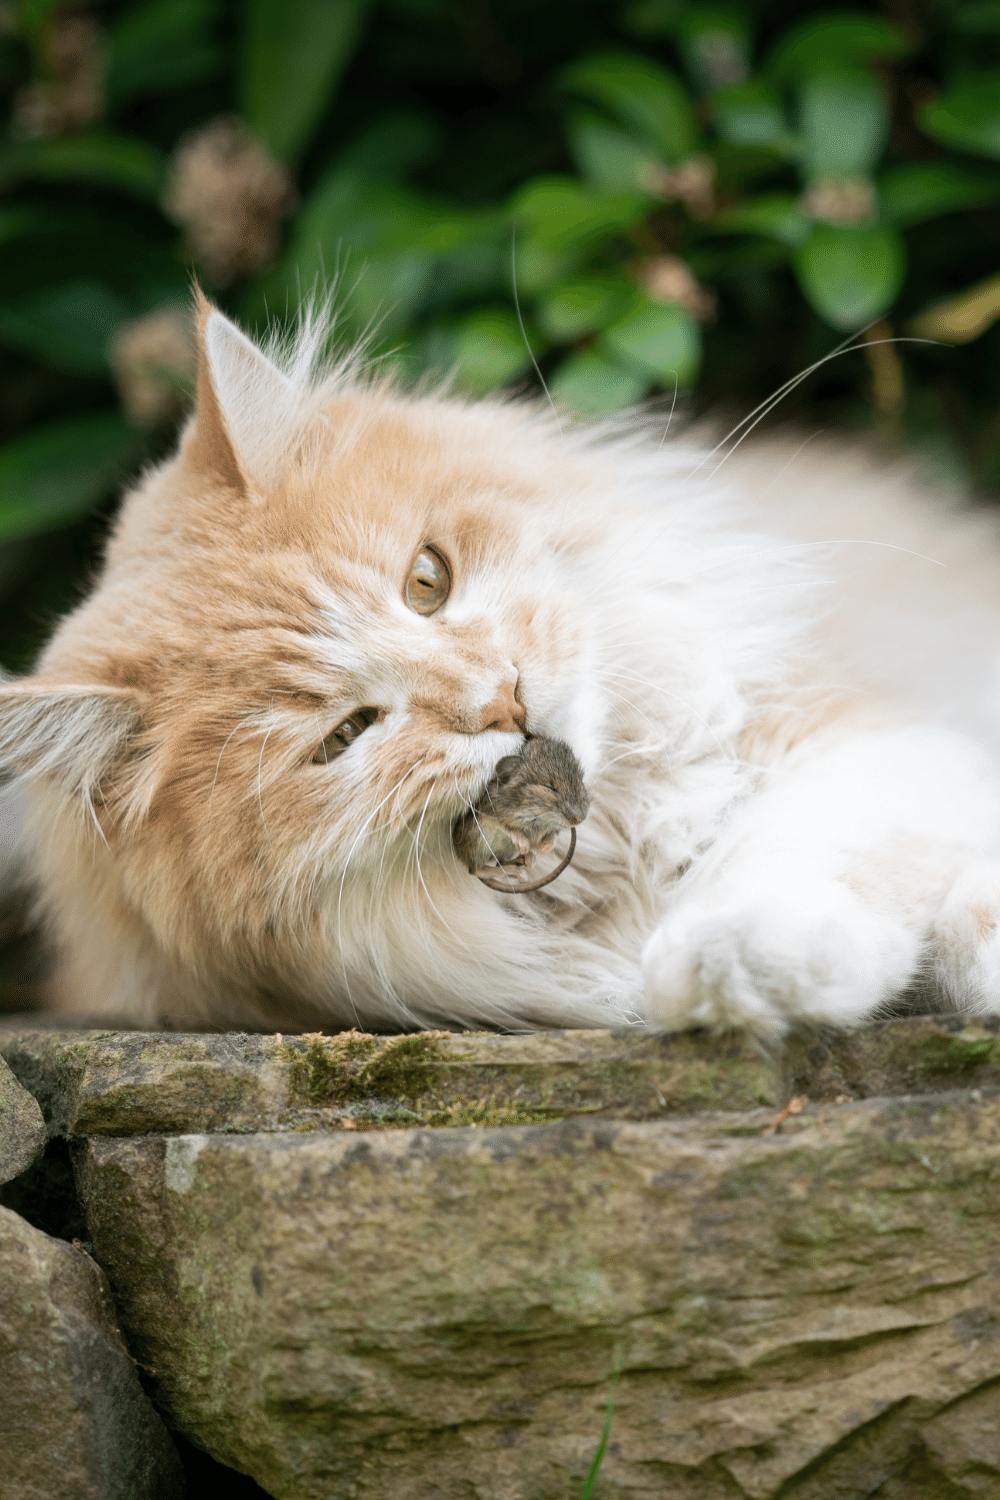 Cats Fulfill Their Appetite From Small Rodents, Bugs, Insects, and Their Likes